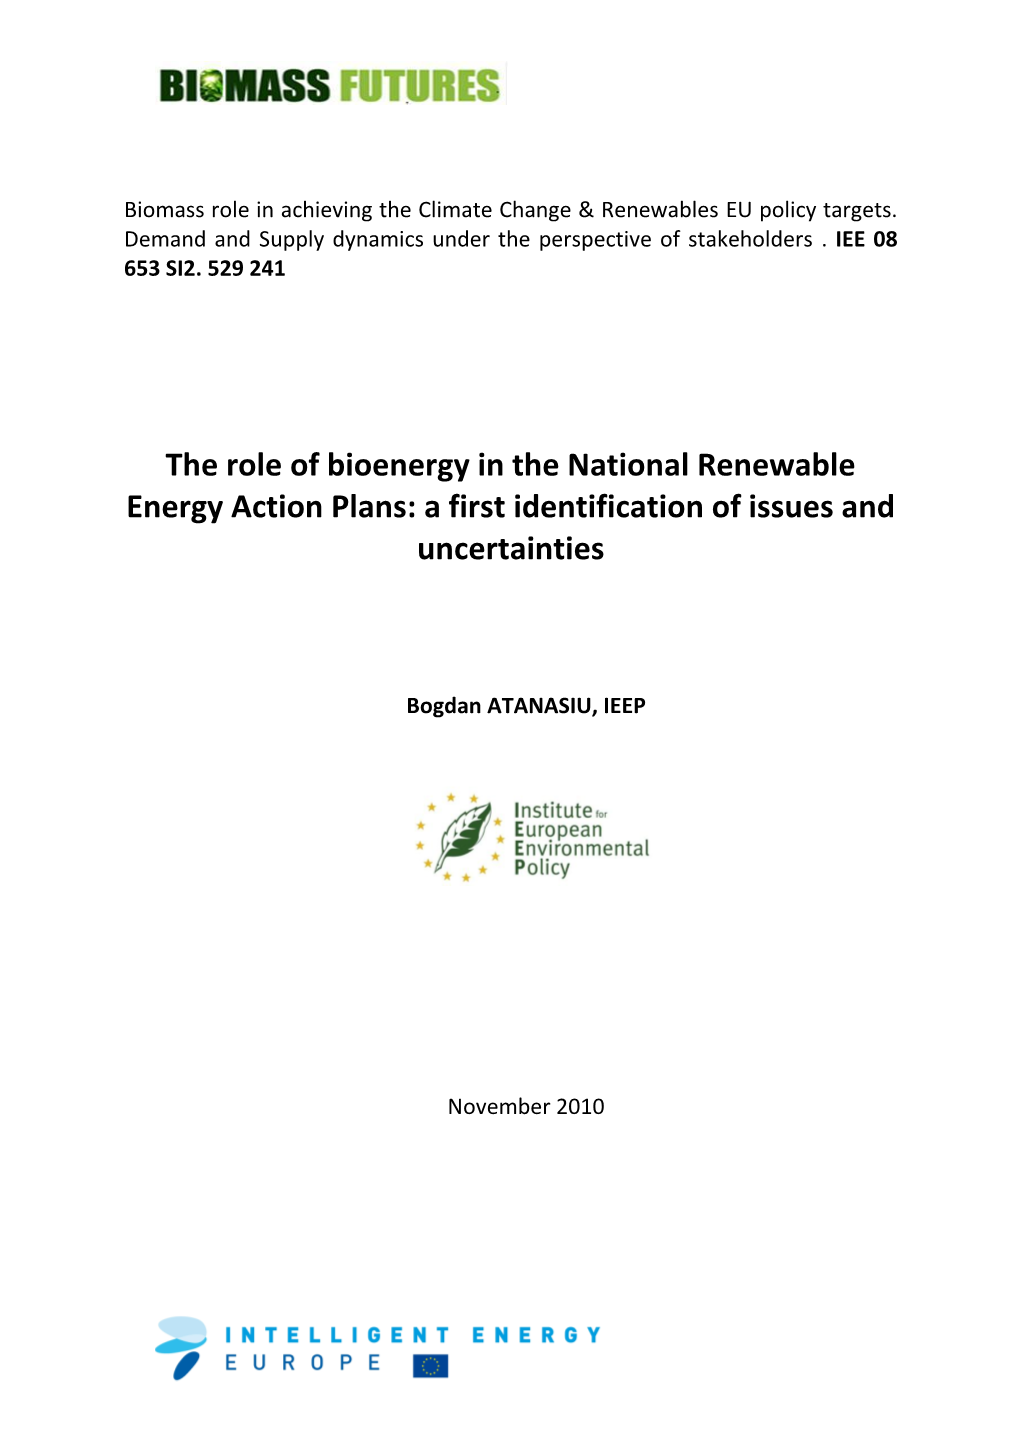 The Role of Bioenergy in the National Renewable Energy Action Plans: a First Identification of Issues and Uncertainties